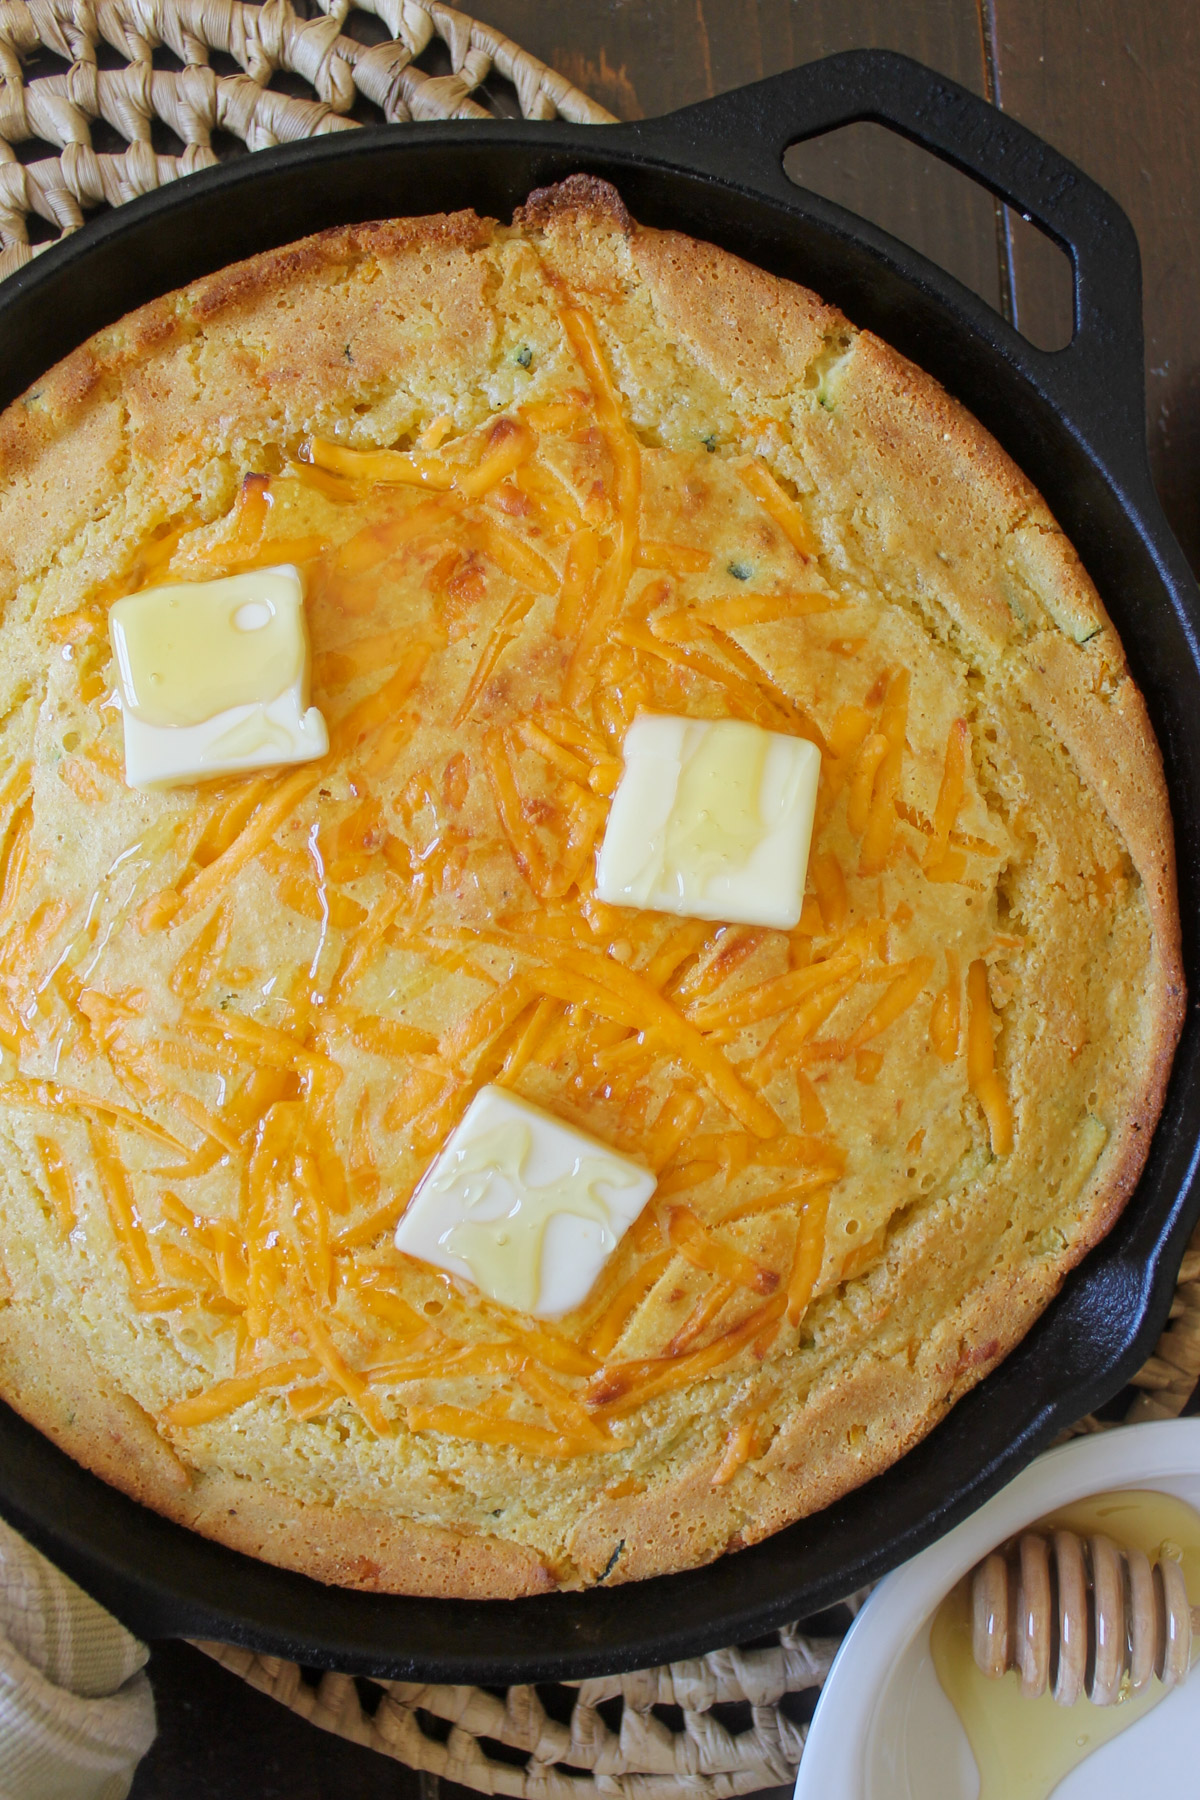 Skillet Cornbread topped with melted cheddar cheese, butter and drizzled with honey.